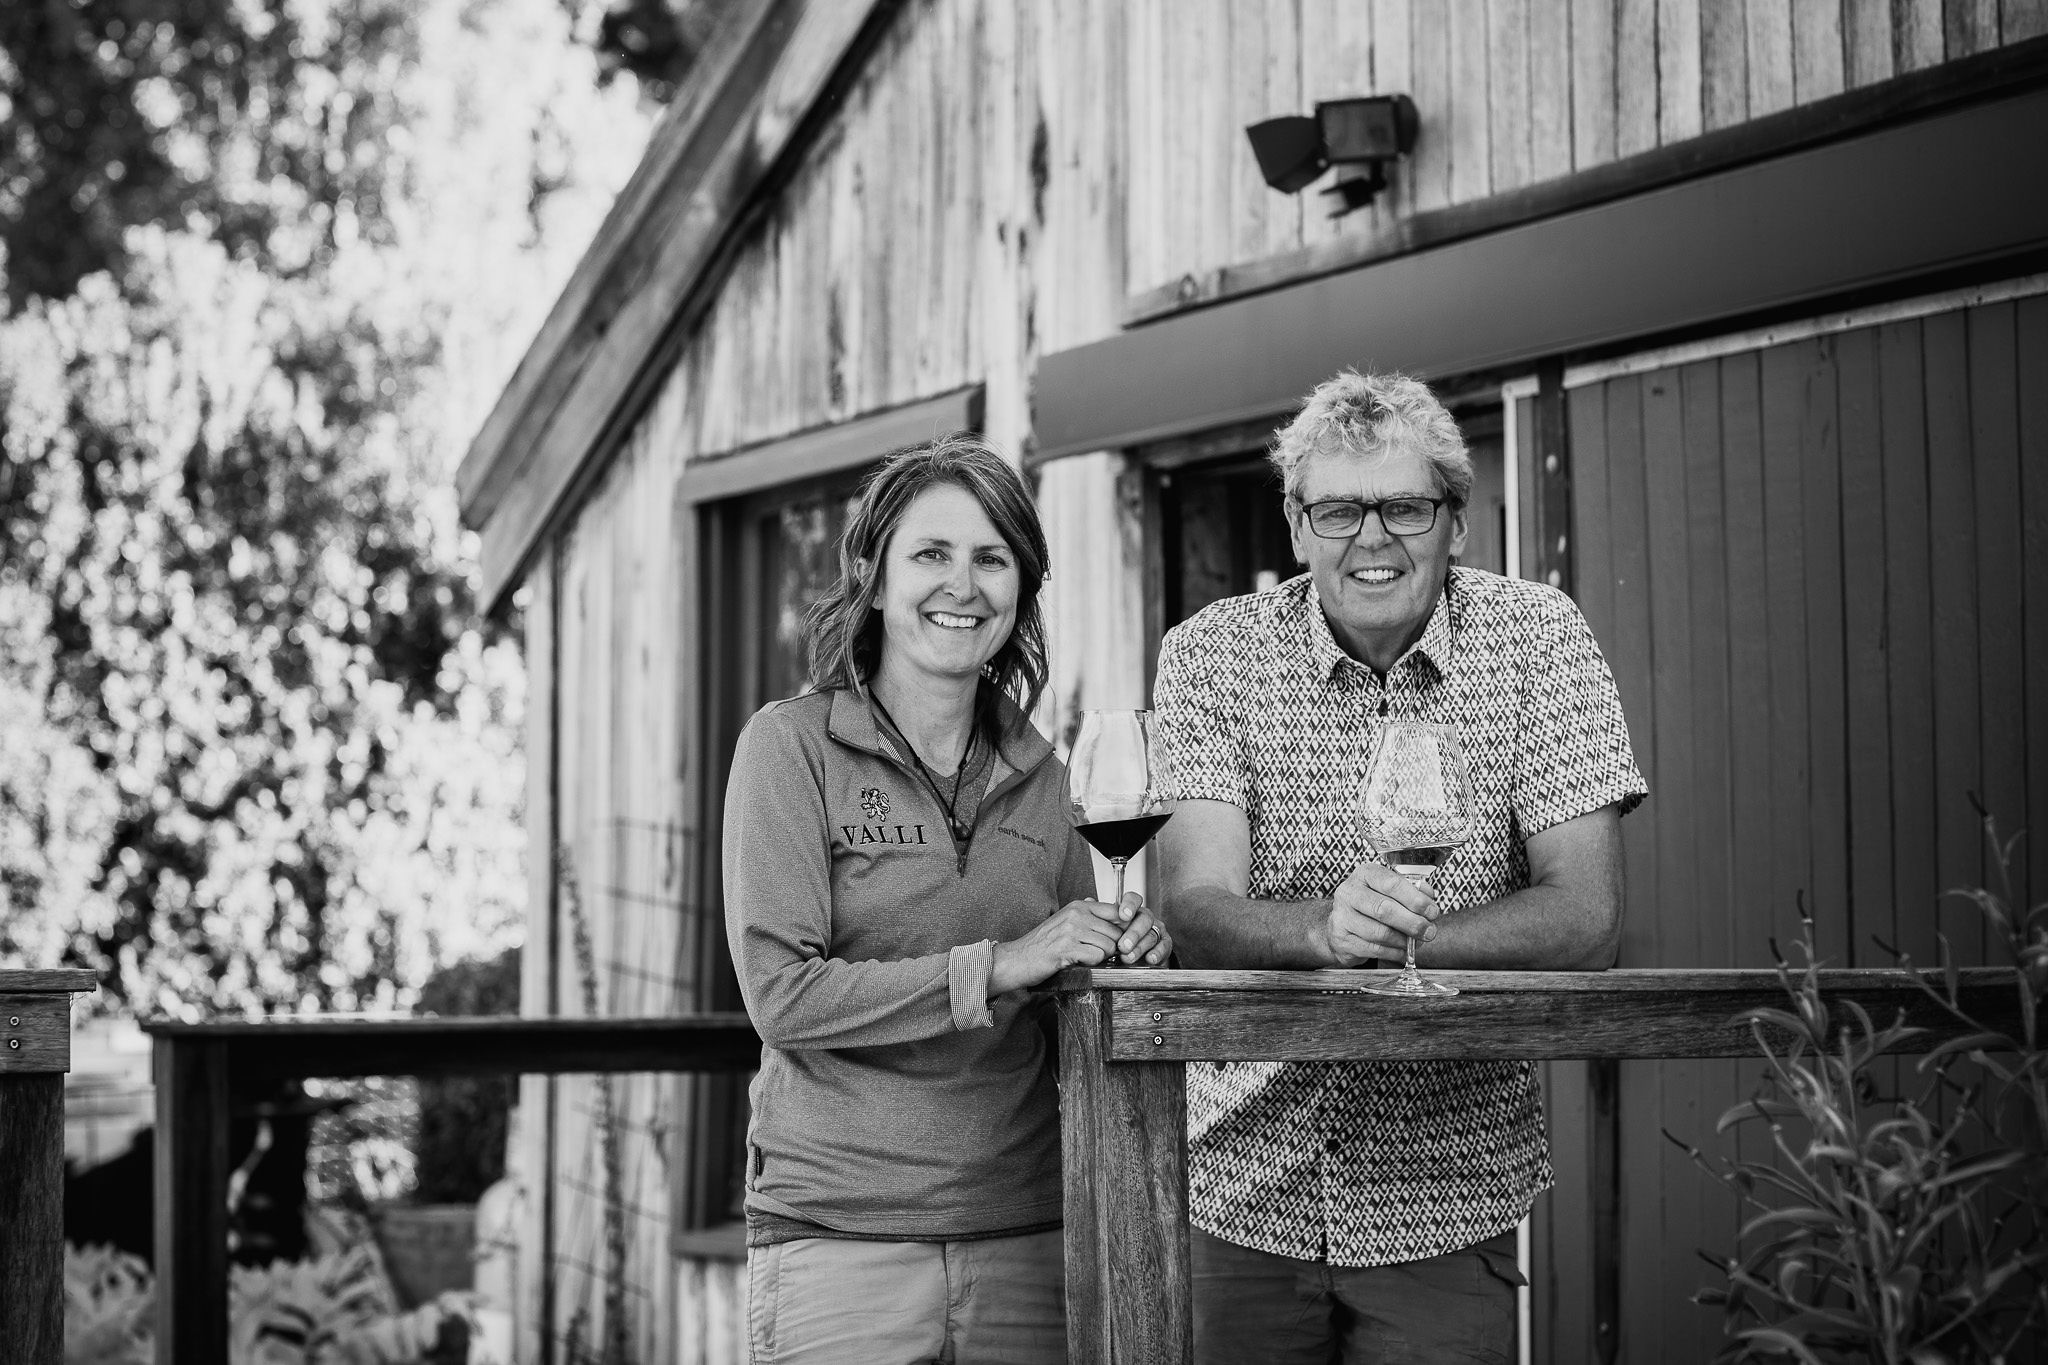 Winemaker Jen Parr and Valli founder Grant Taylor toast